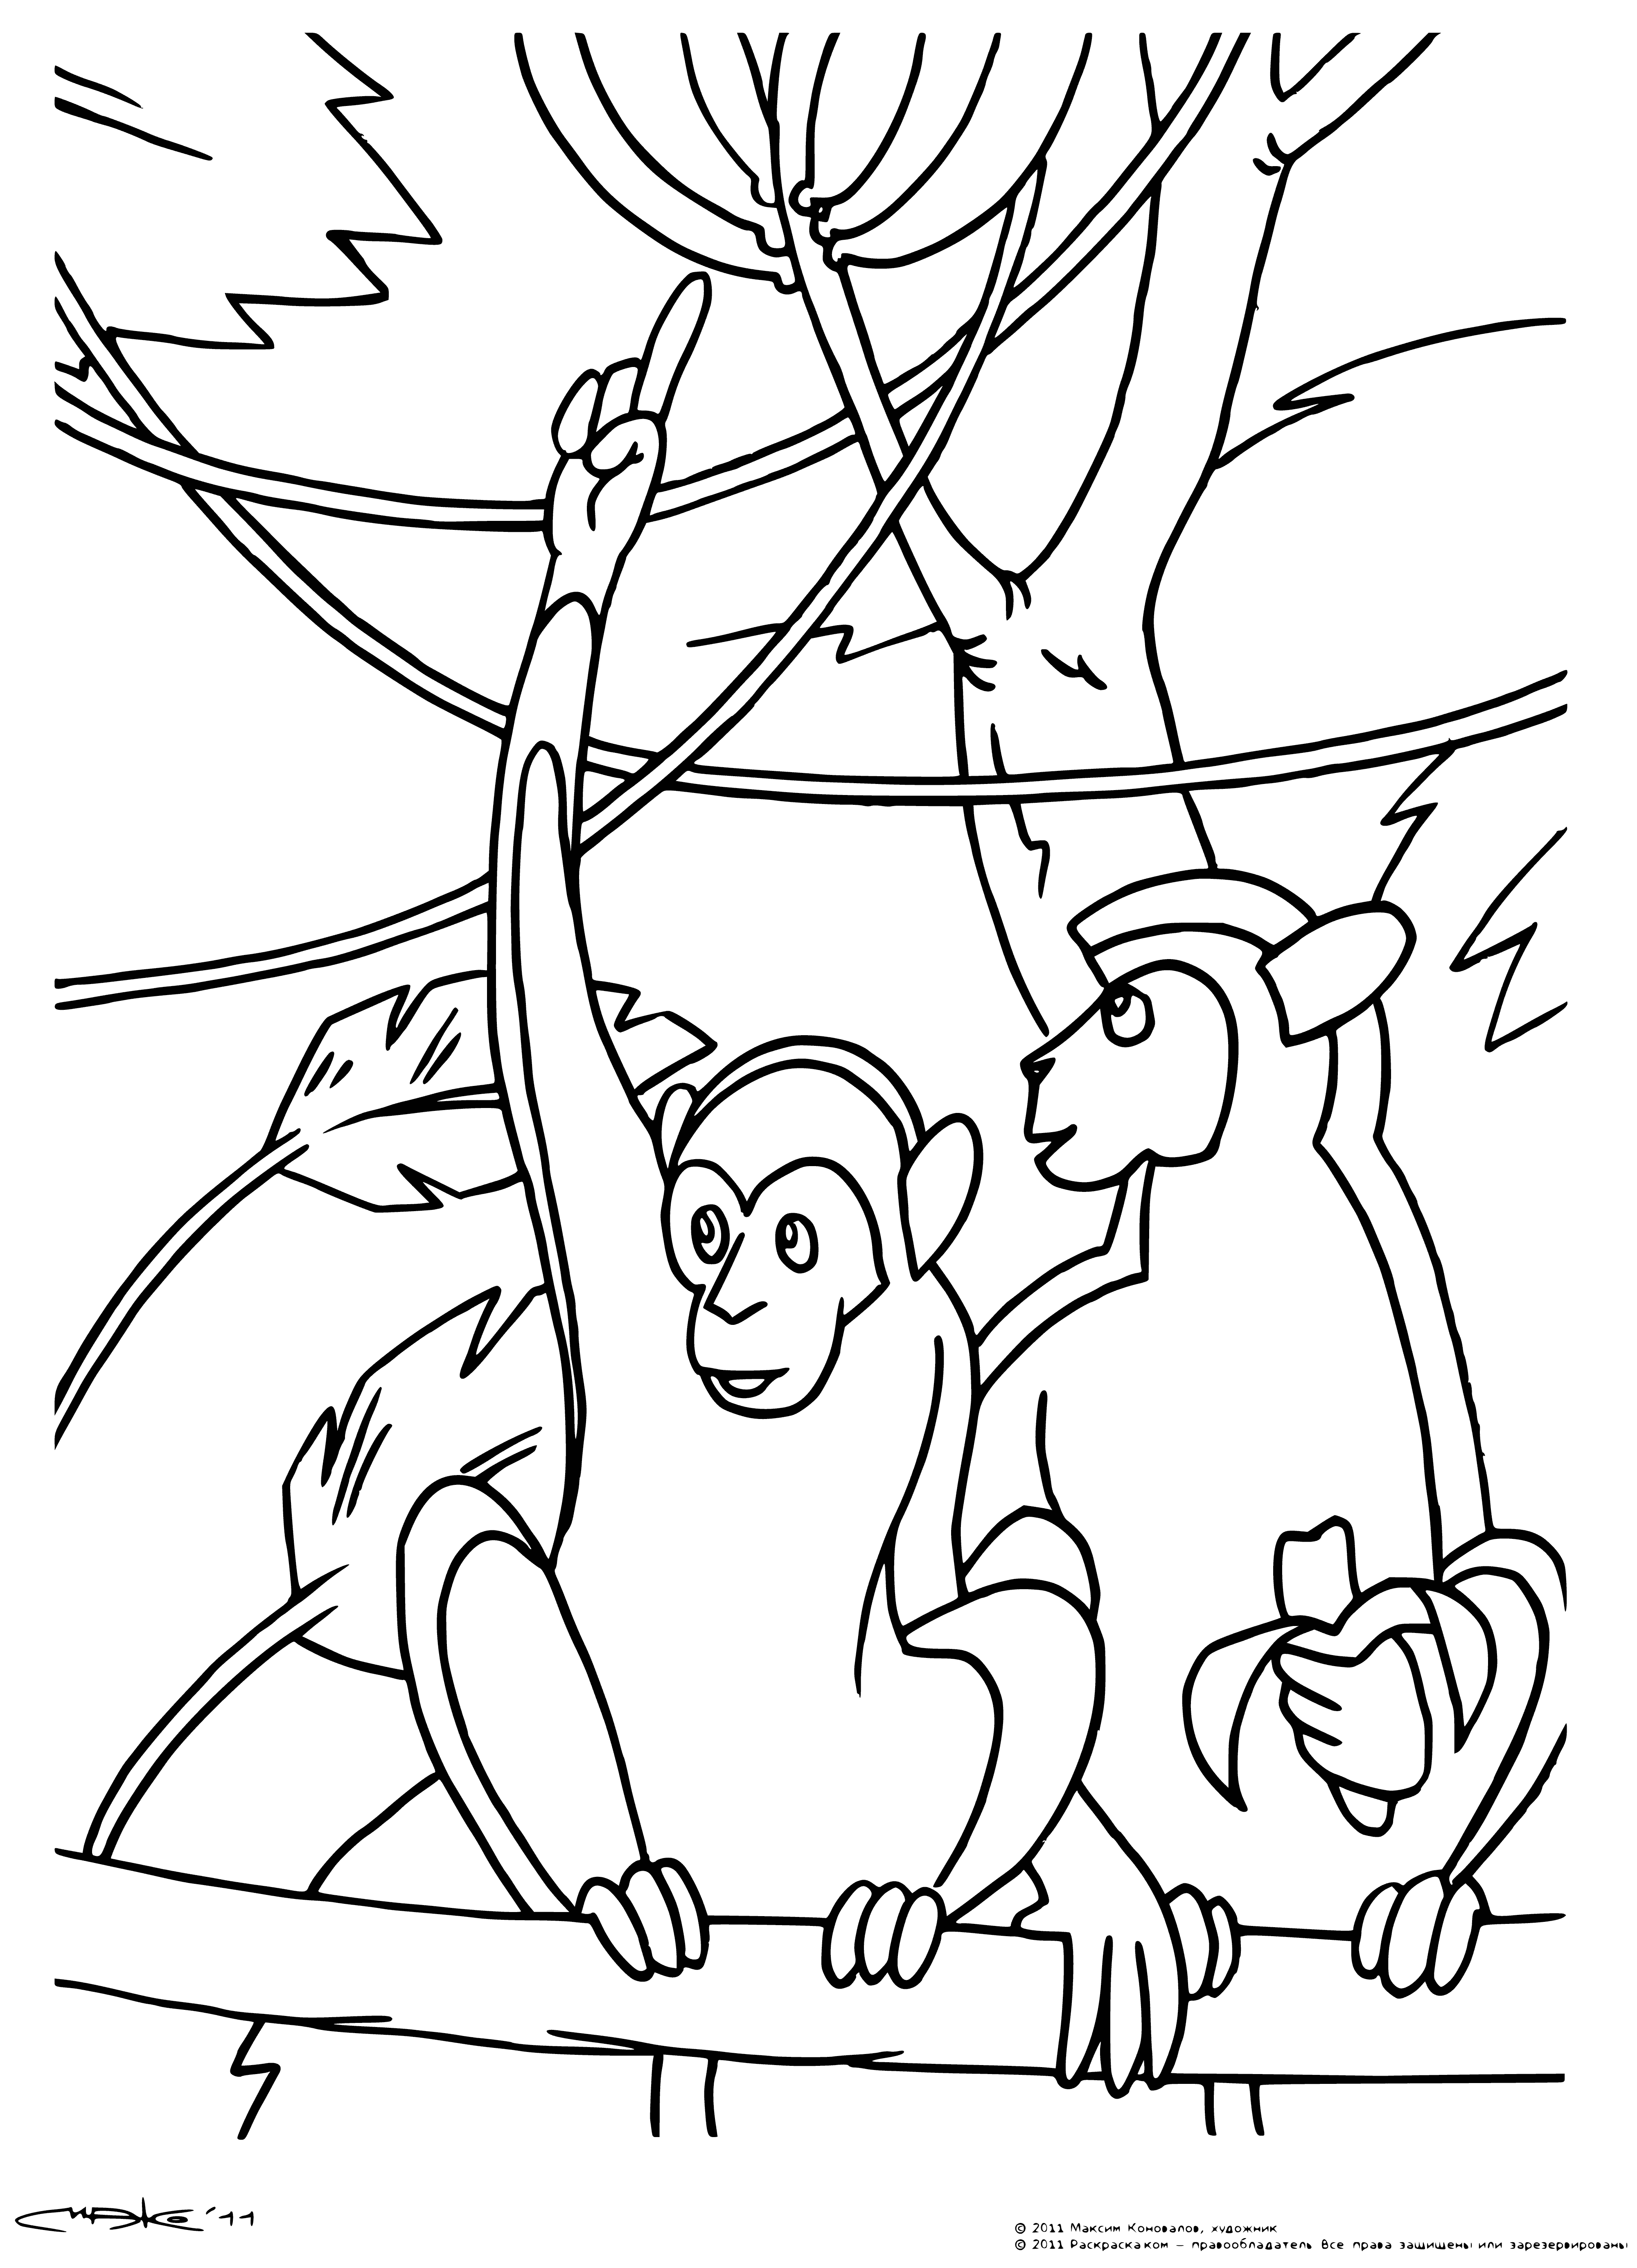 coloring page: 3 Mowgli standing on a stone wall, looking at something in the distance, holding spears and bow/arrow. Wearing loincloths & topknot hair.